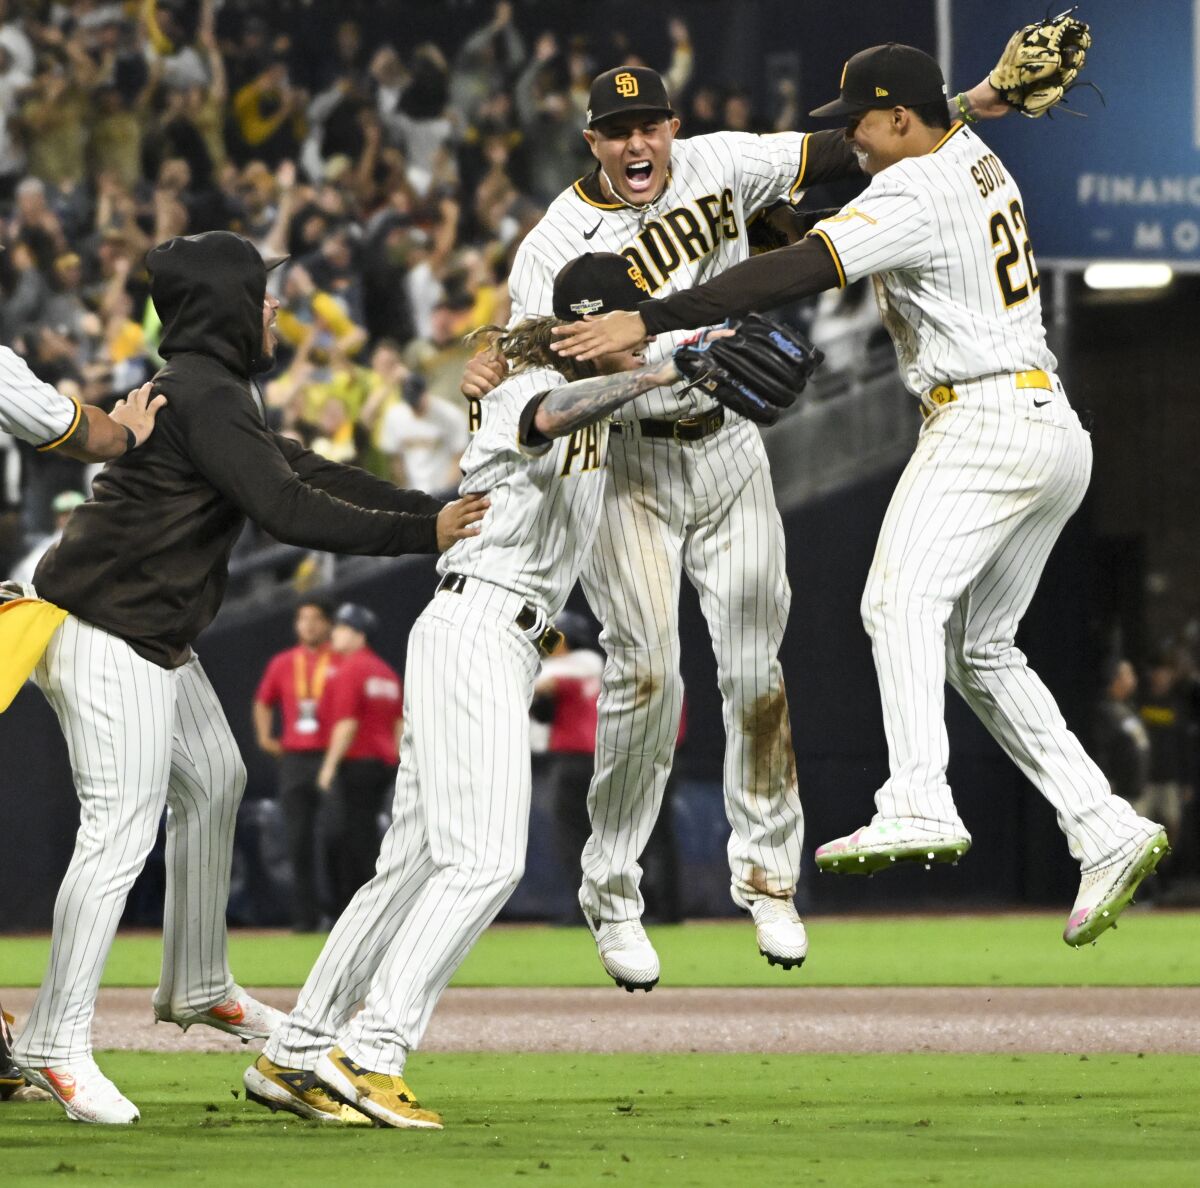 San Diego Padres players celebrate after defeating the Dodgers in Game 4 of the NLDS.